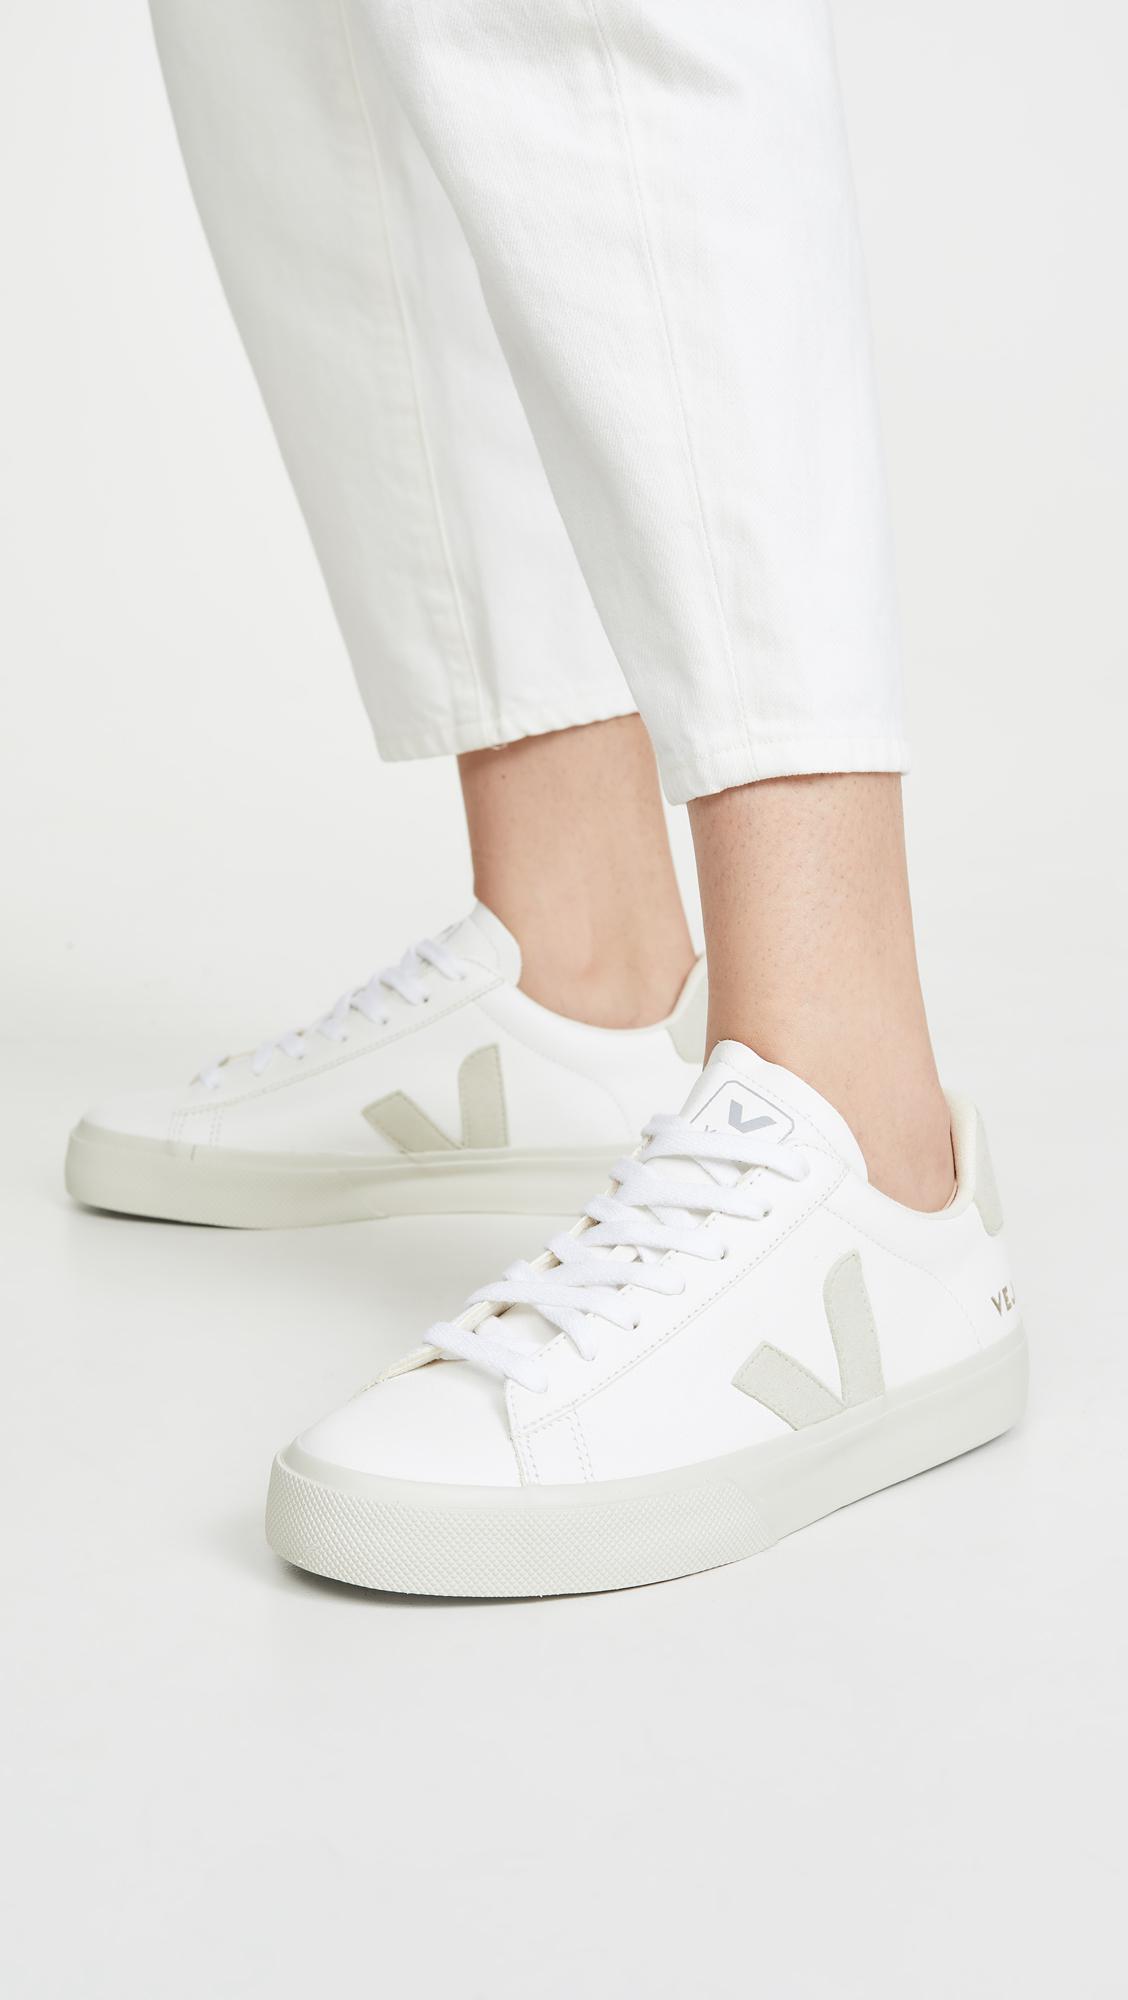 Veja Leather Campo Sneakers in White/Natural (White) | Lyst